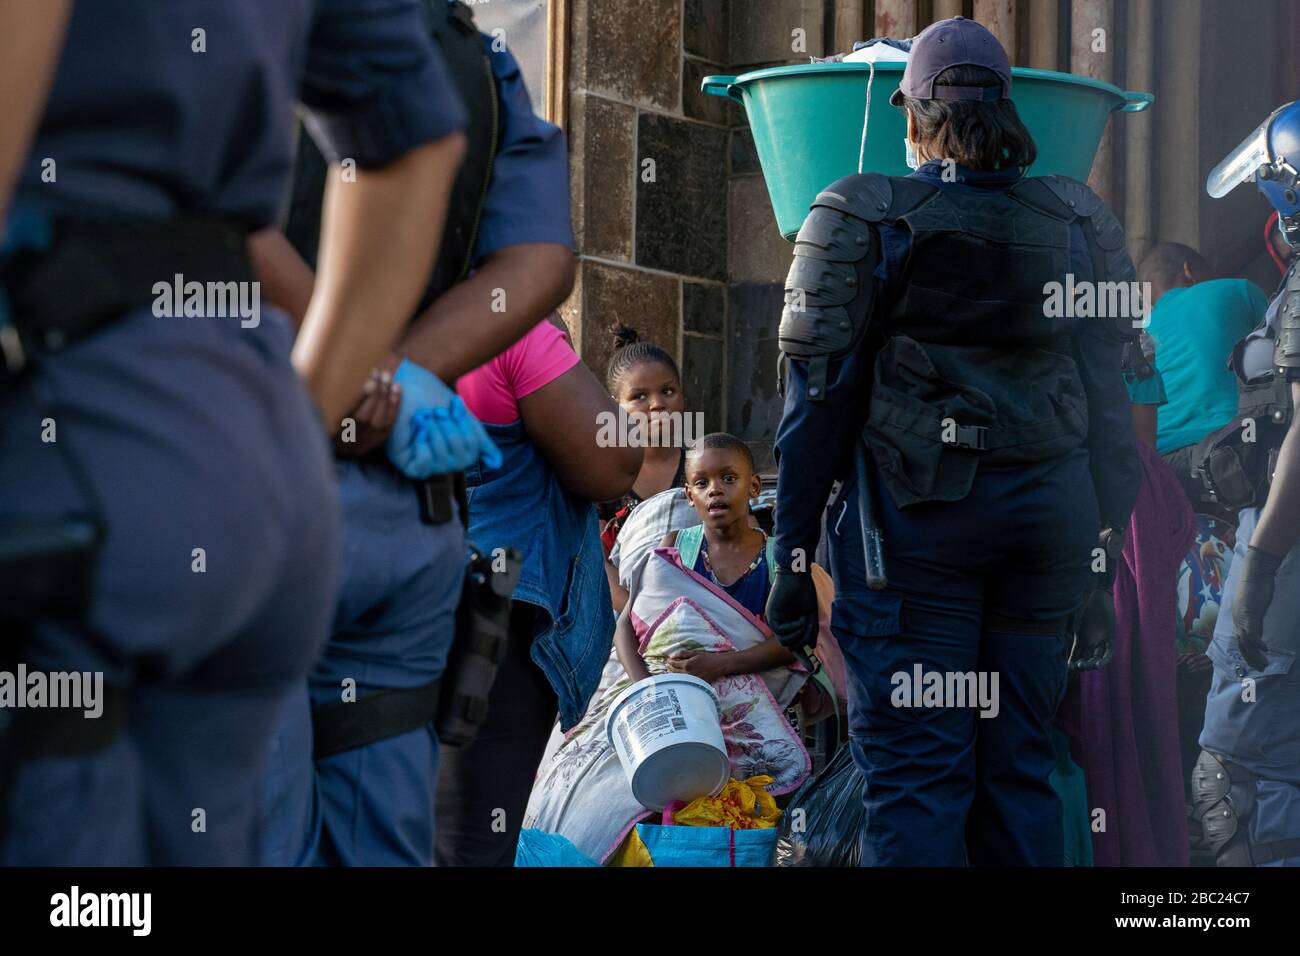 Hundreds of refugees are removed from the Central Methodist church. Cape Town, on 2 April 2020. The refugees have up until now refused to the leave church in Green Market Square in Cape Town due to fears of xenophobic violence. Cape Town, South Africa.  The SA Human Rights Commission said the refugees were moved from the church due to health concerns amid the South Africas countrywide coronavirus lockdown. The group of around 600 people refused to leave the church, despite the newly introduced ban on gatherings of more than 100 people.  They were moved to a new facility in Belville 25 kilometr Stock Photo